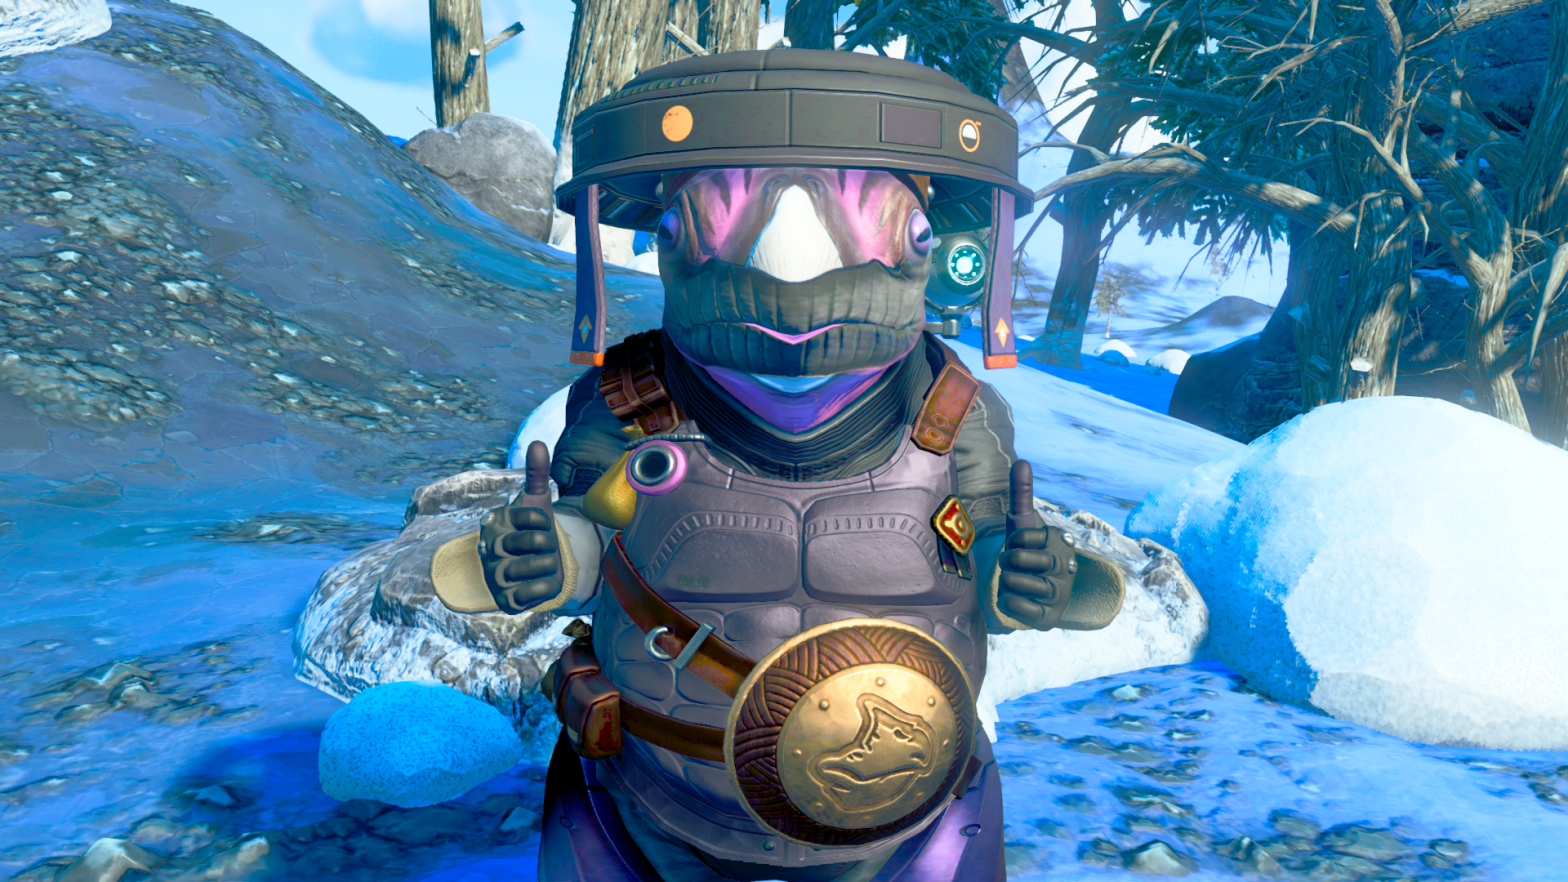 I've attached my latest selfie. Why? Because I'm cute as heck! (Screenshot: Hello Games)